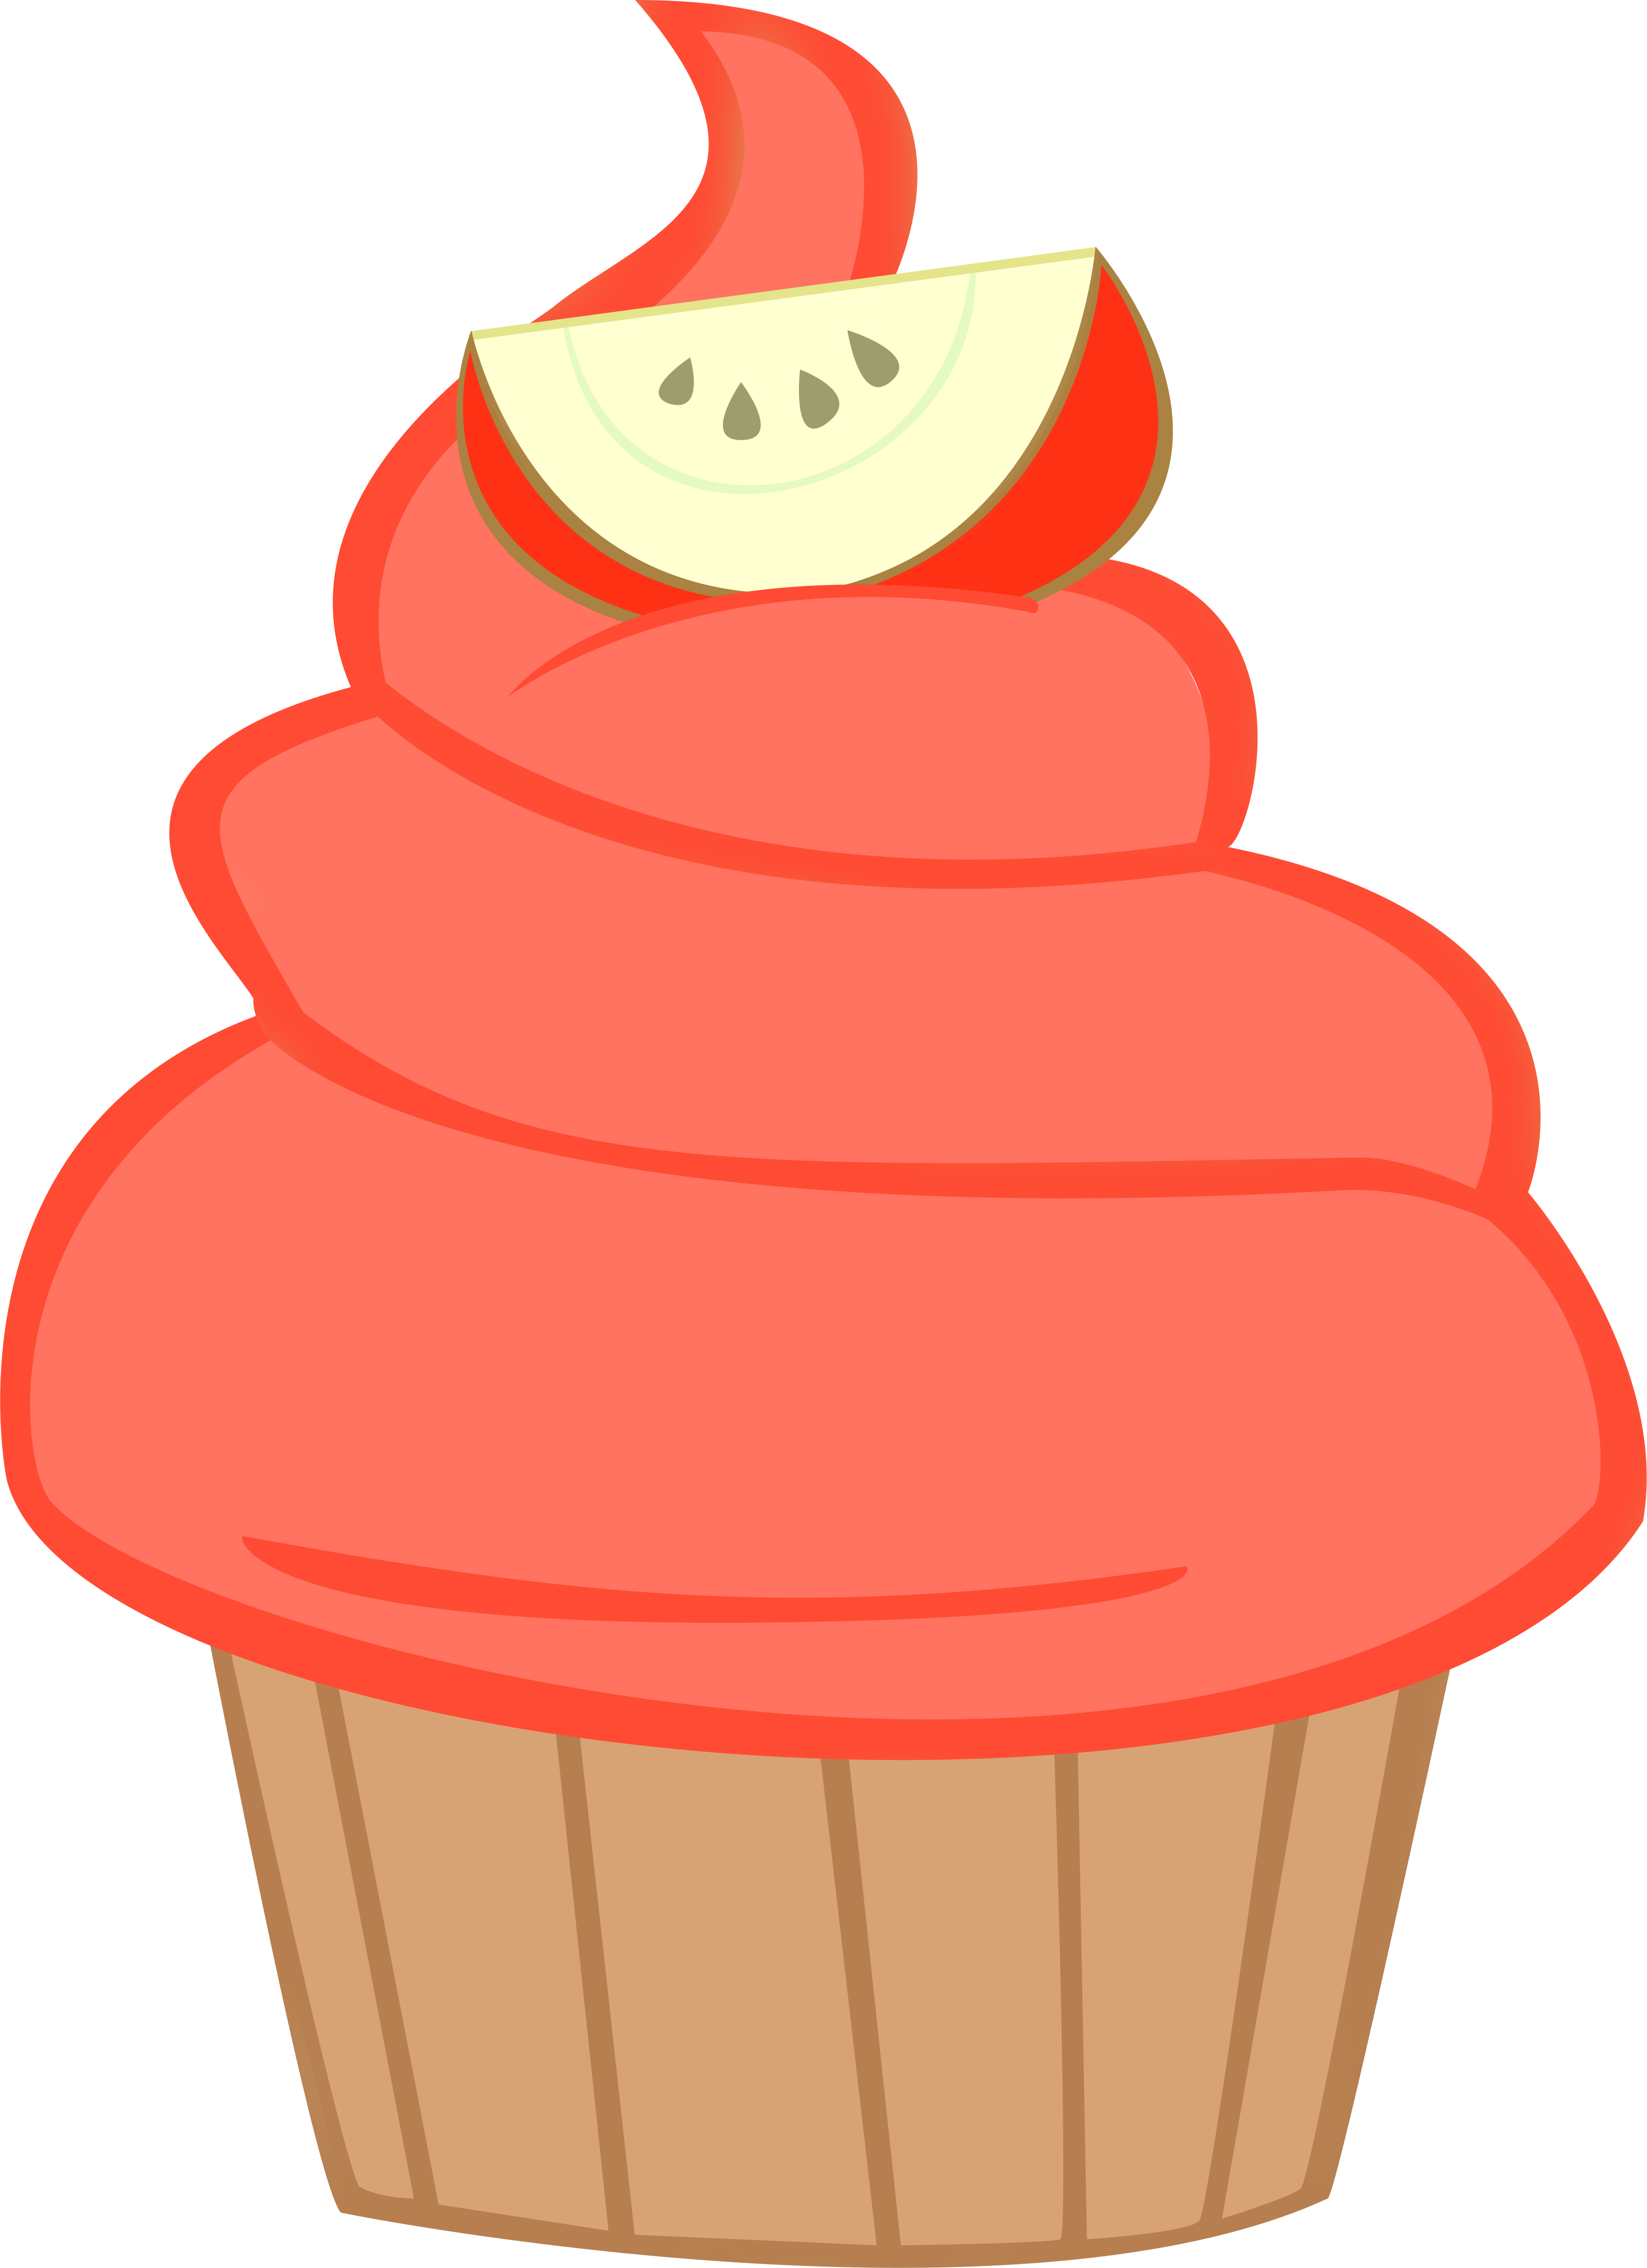 Image result for mlp. Sad clipart cupcake